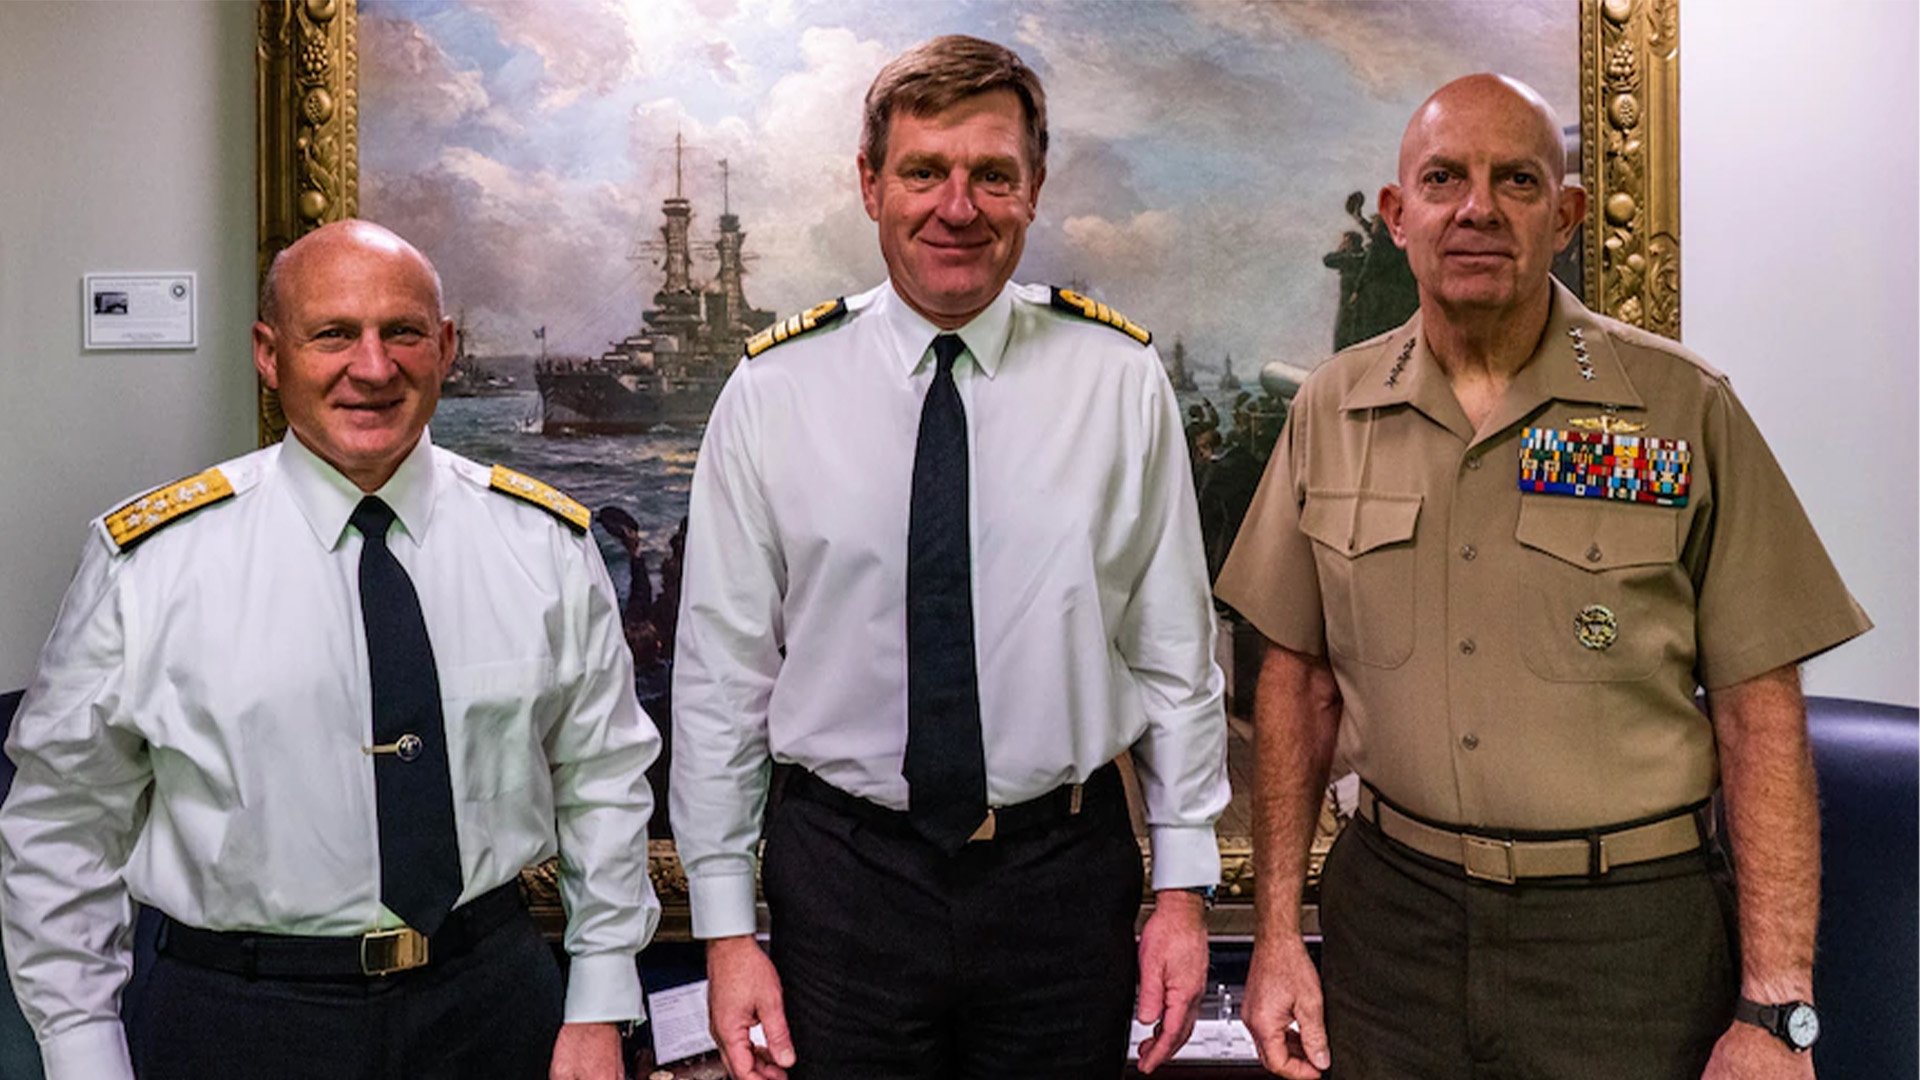 Chief of Naval Operations Adm. Mike Gilday (left) and Royal Navy First Sea Lord and Chief of Naval Staff Adm. Sir Ben Key (center) meet with the Commandant of the US Marine Corps, Gen. David Berger, at the Pentagon on Oct. 20, 2022. US Navy photo by Mass Communications Specialist 1st Class Michael Zingaro.